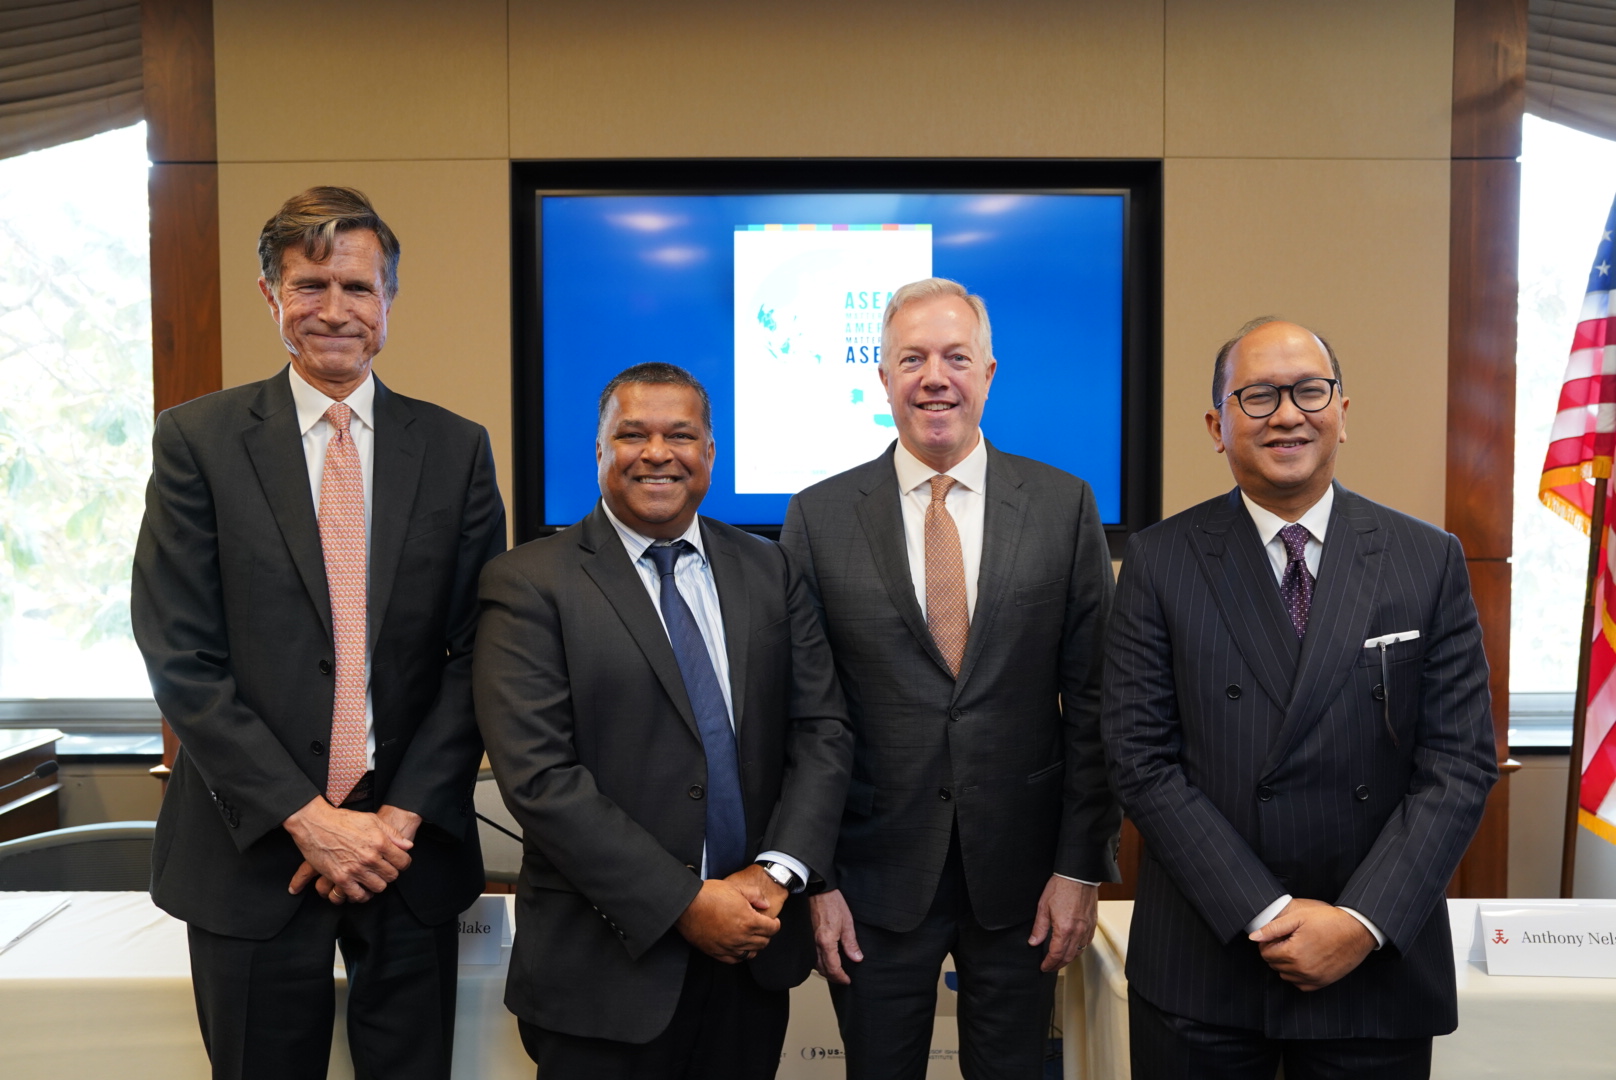 Four men in suits (Amb. Robert Blake (far left), H.E. Rosan Roeslani (far right), and Amb. Ted Osius (center right). Dr. Satu Limaye (center left) pose in front of a screen with the ASEAN Matters for America cover.